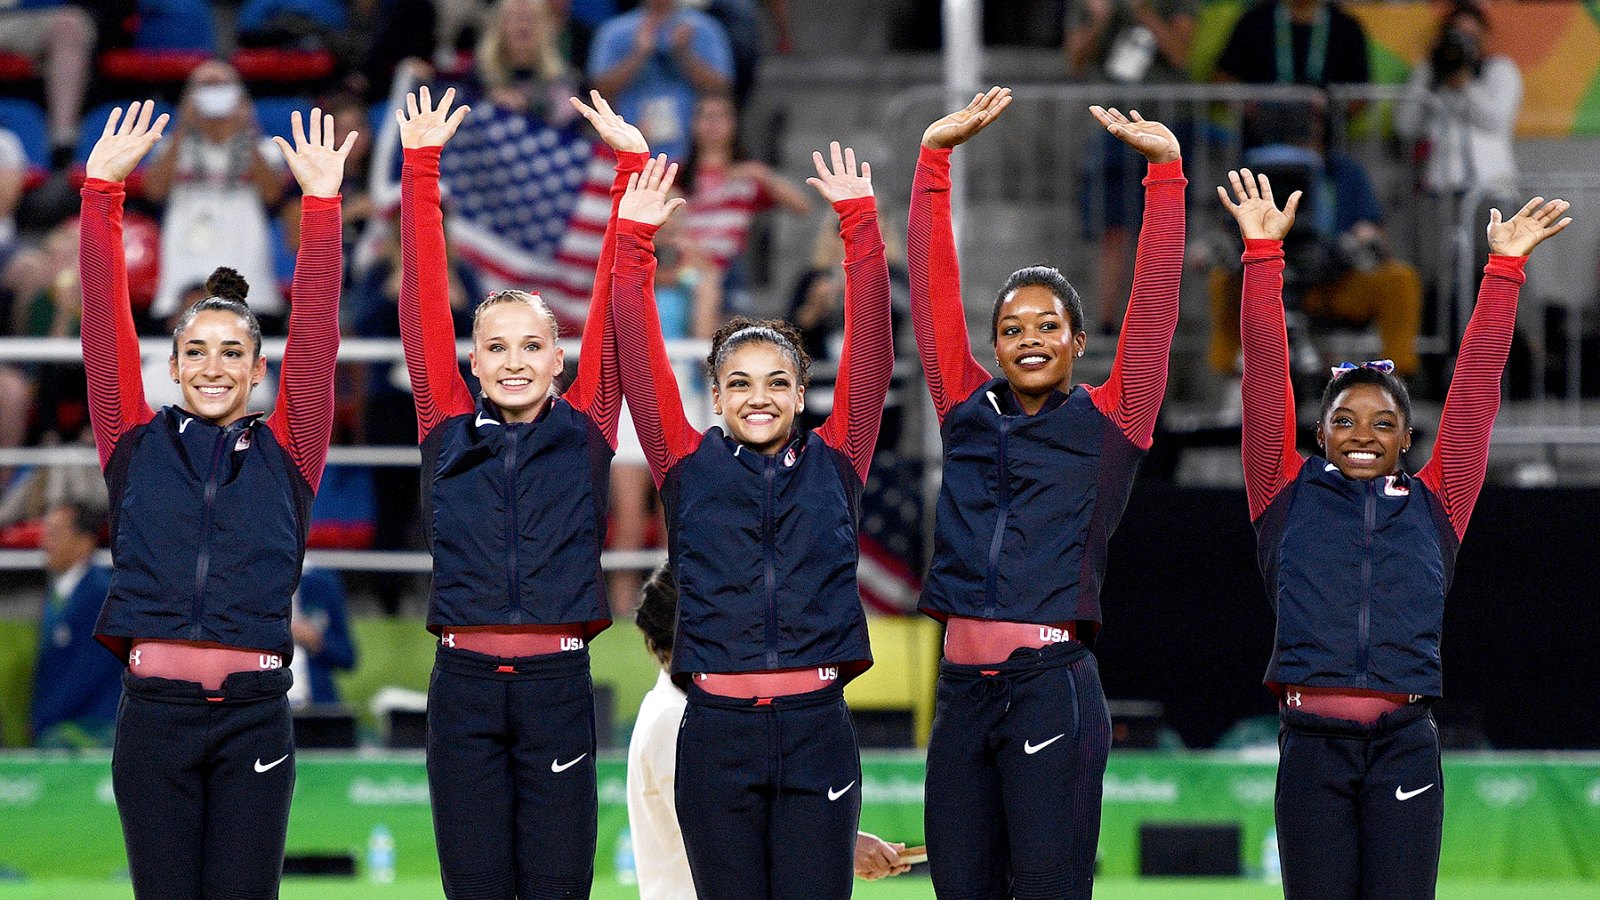 Gold Medalists Simone Biles, Gabrielle Douglas, Lauren Hernandez, Madison Kocian and Alexandra Raisman of the United States celebrate on the podium at the medal ceremony for the Artistic Gymnastics Women's Team Final on Day 4 of the Rio 2016 Olympic Games at the Rio Olympic Arena on August 9, 2016 in Rio de Janeiro, Brazil.